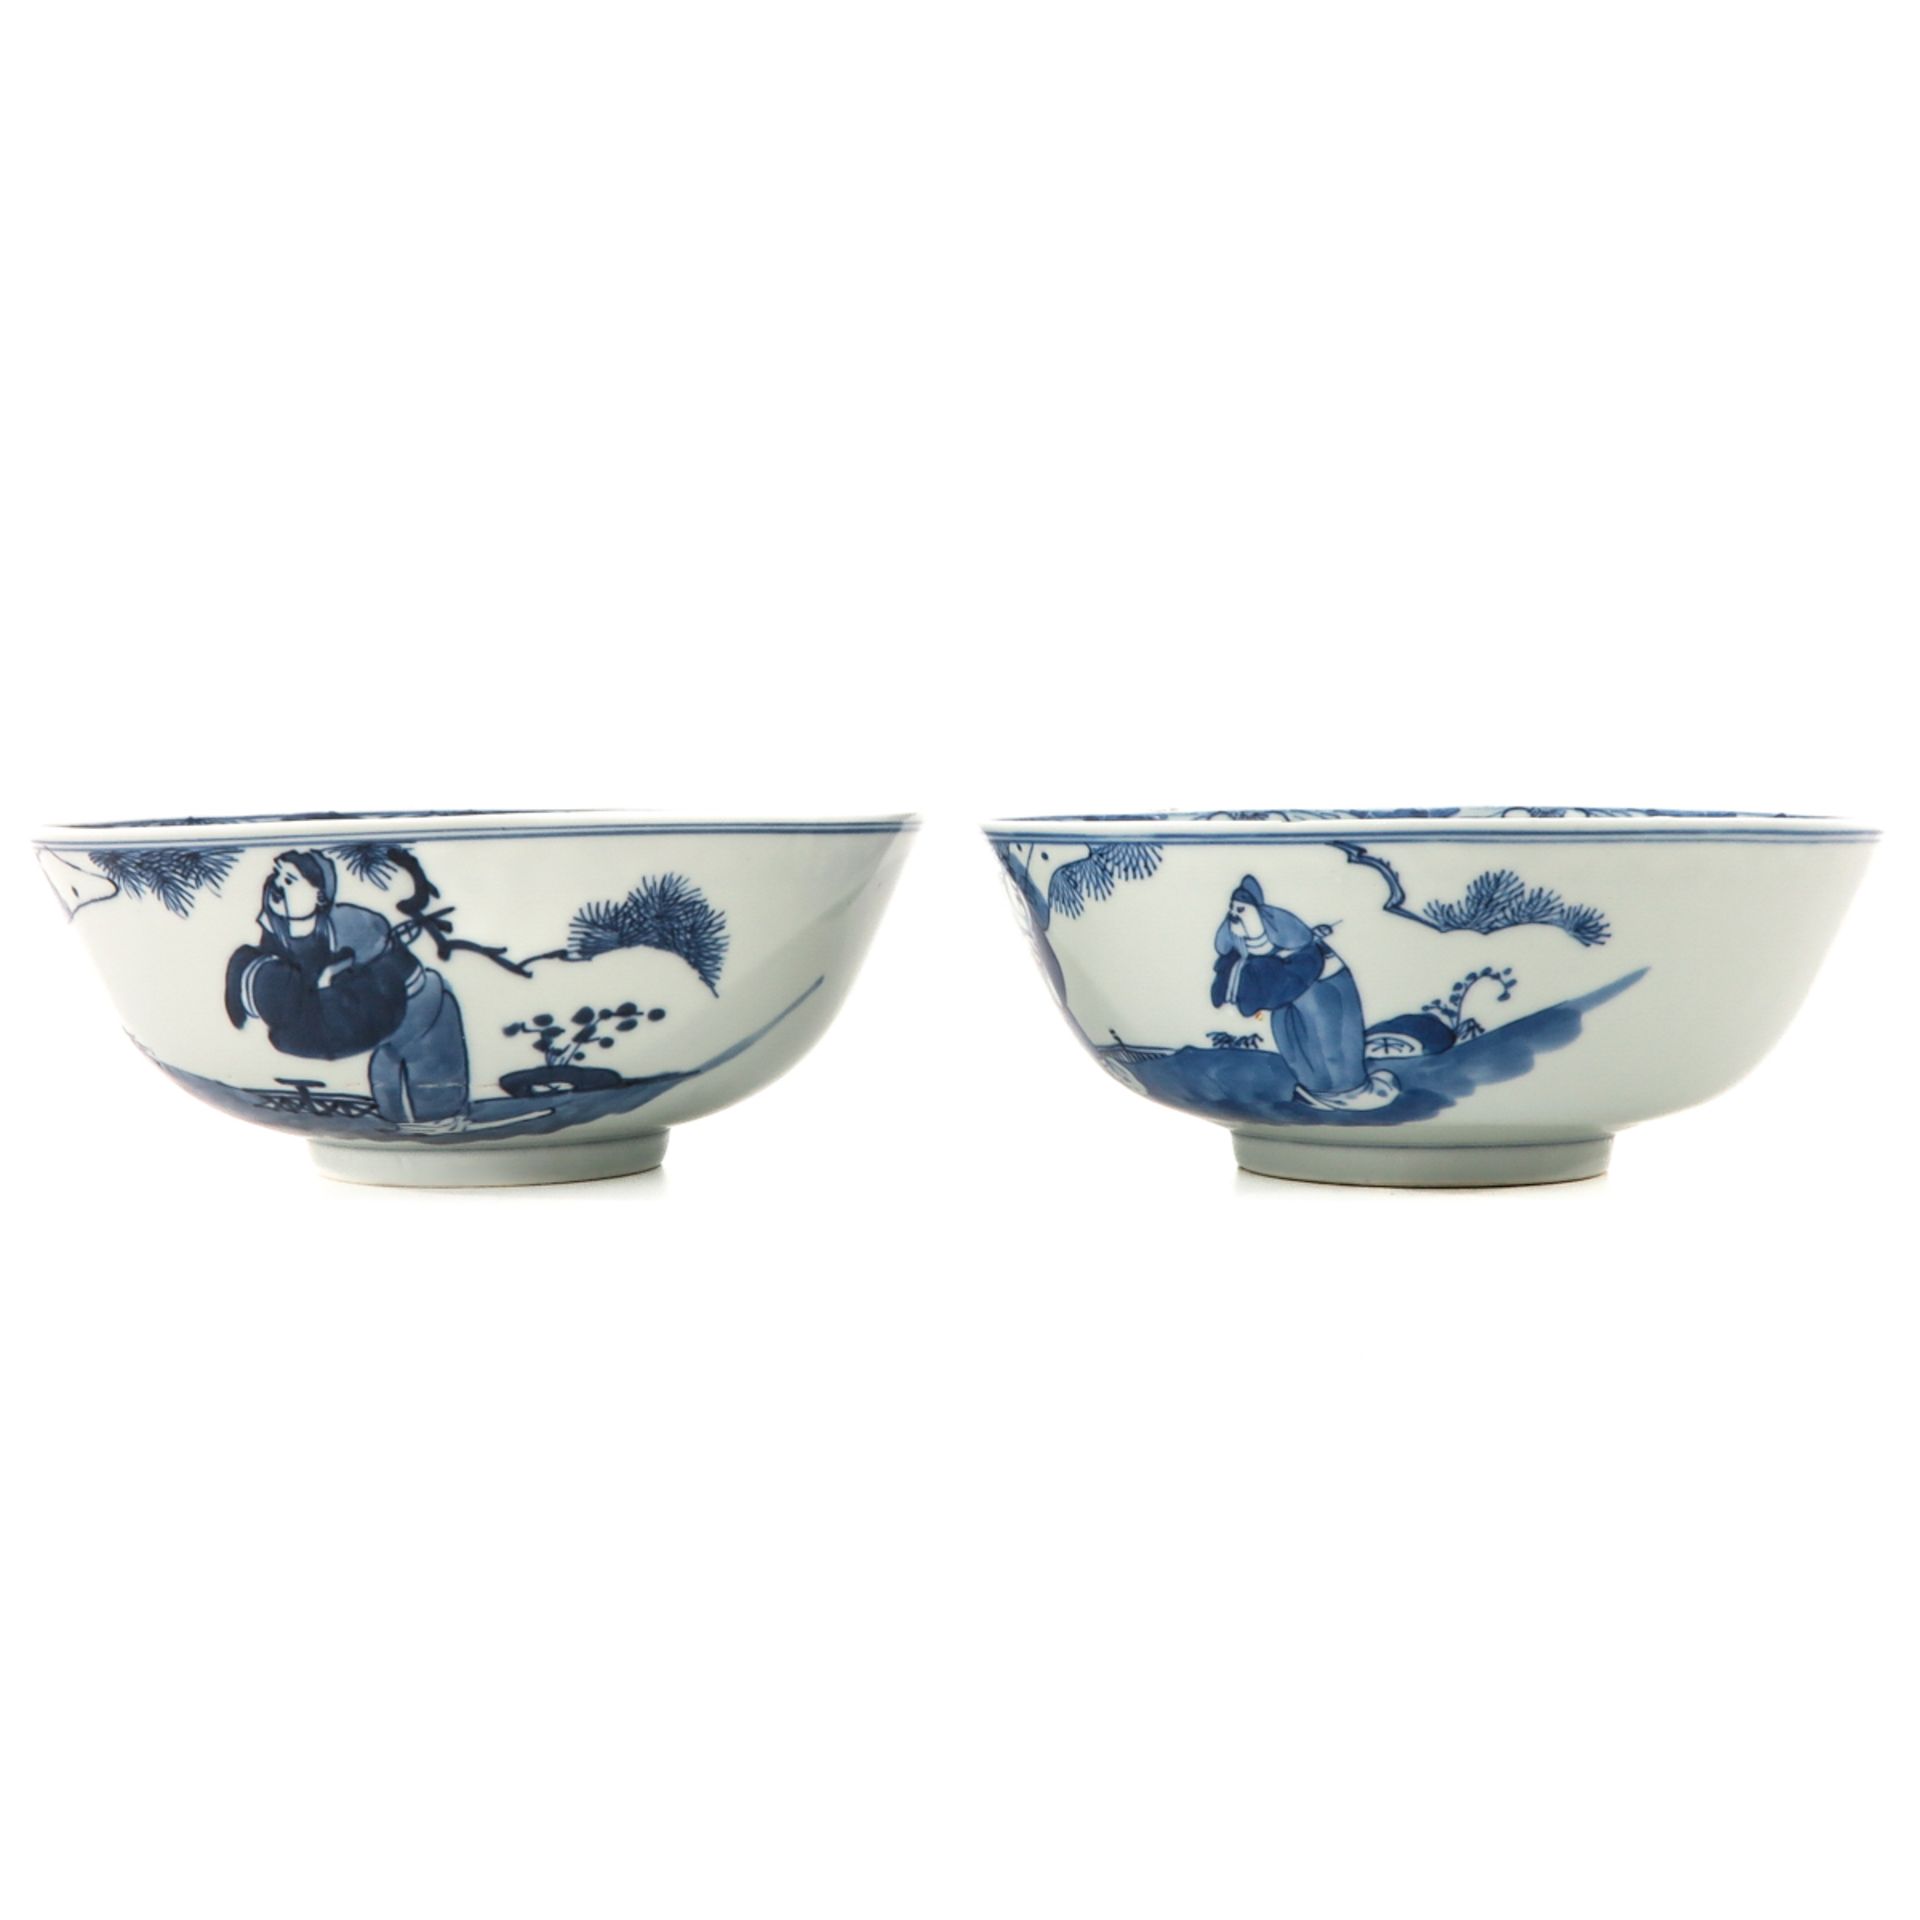 A Lot of 2 Blue and White Bowls - Image 2 of 10